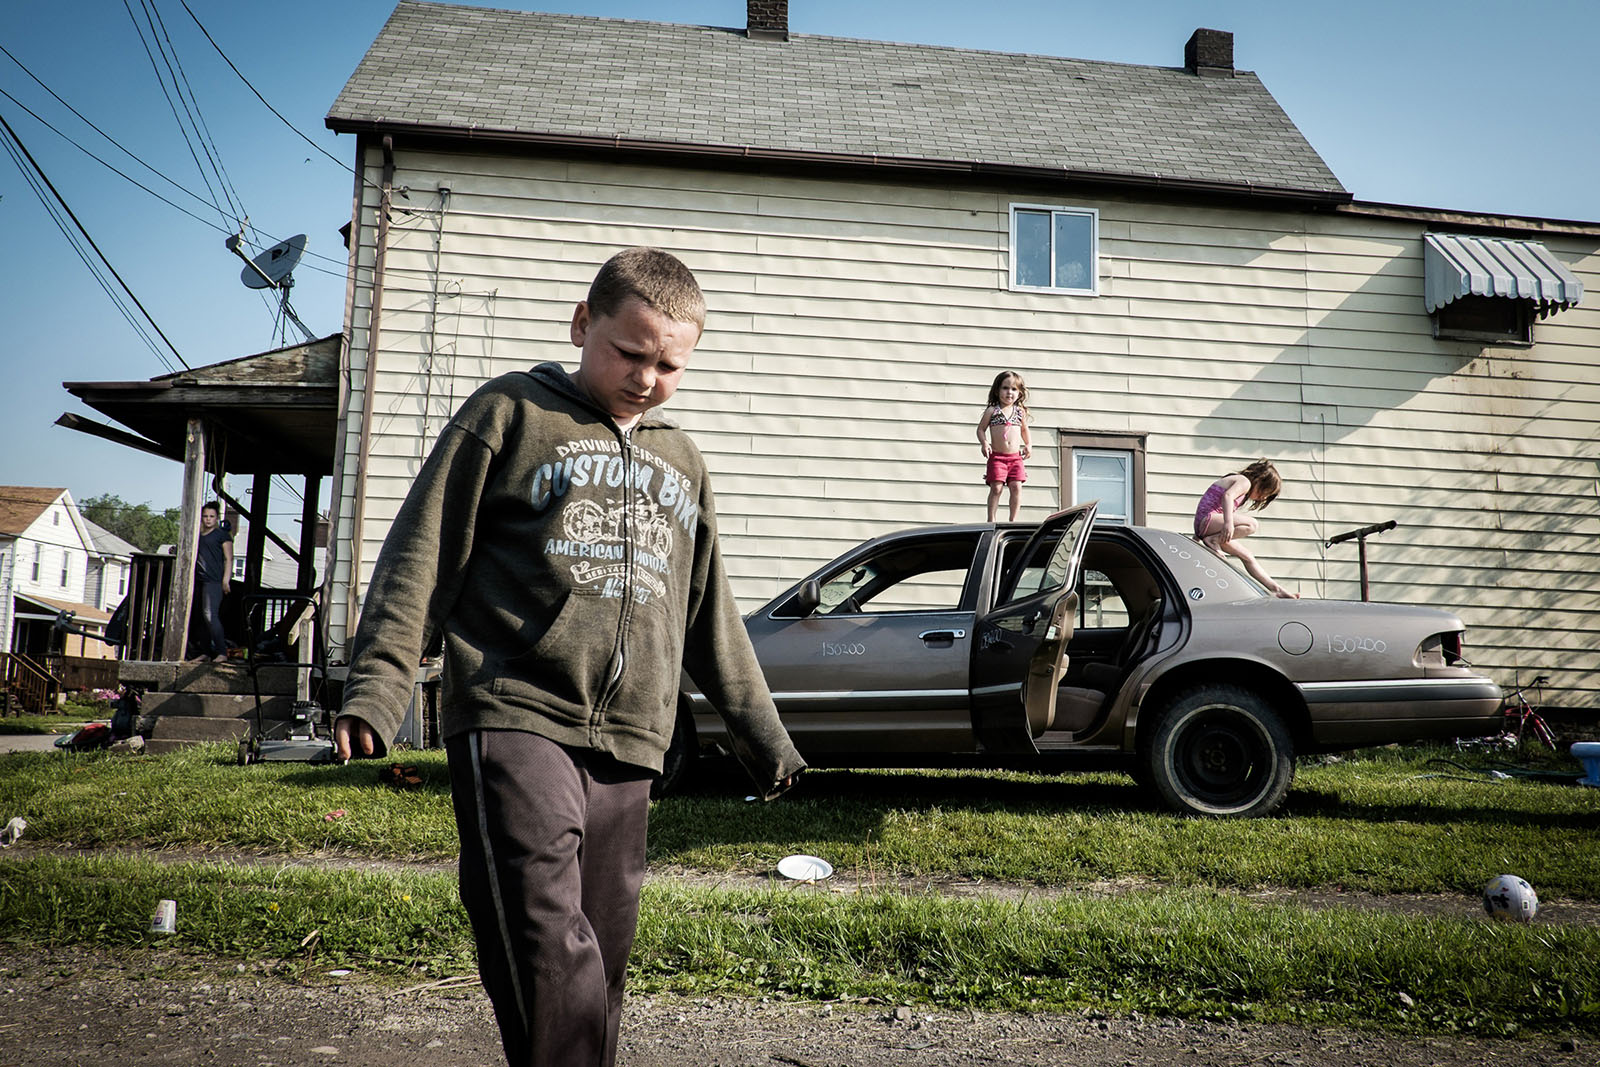 Children play on their dad's demolition derby car outside of their home in West Aliquippa, Pa. USA, on May 8, 2015.